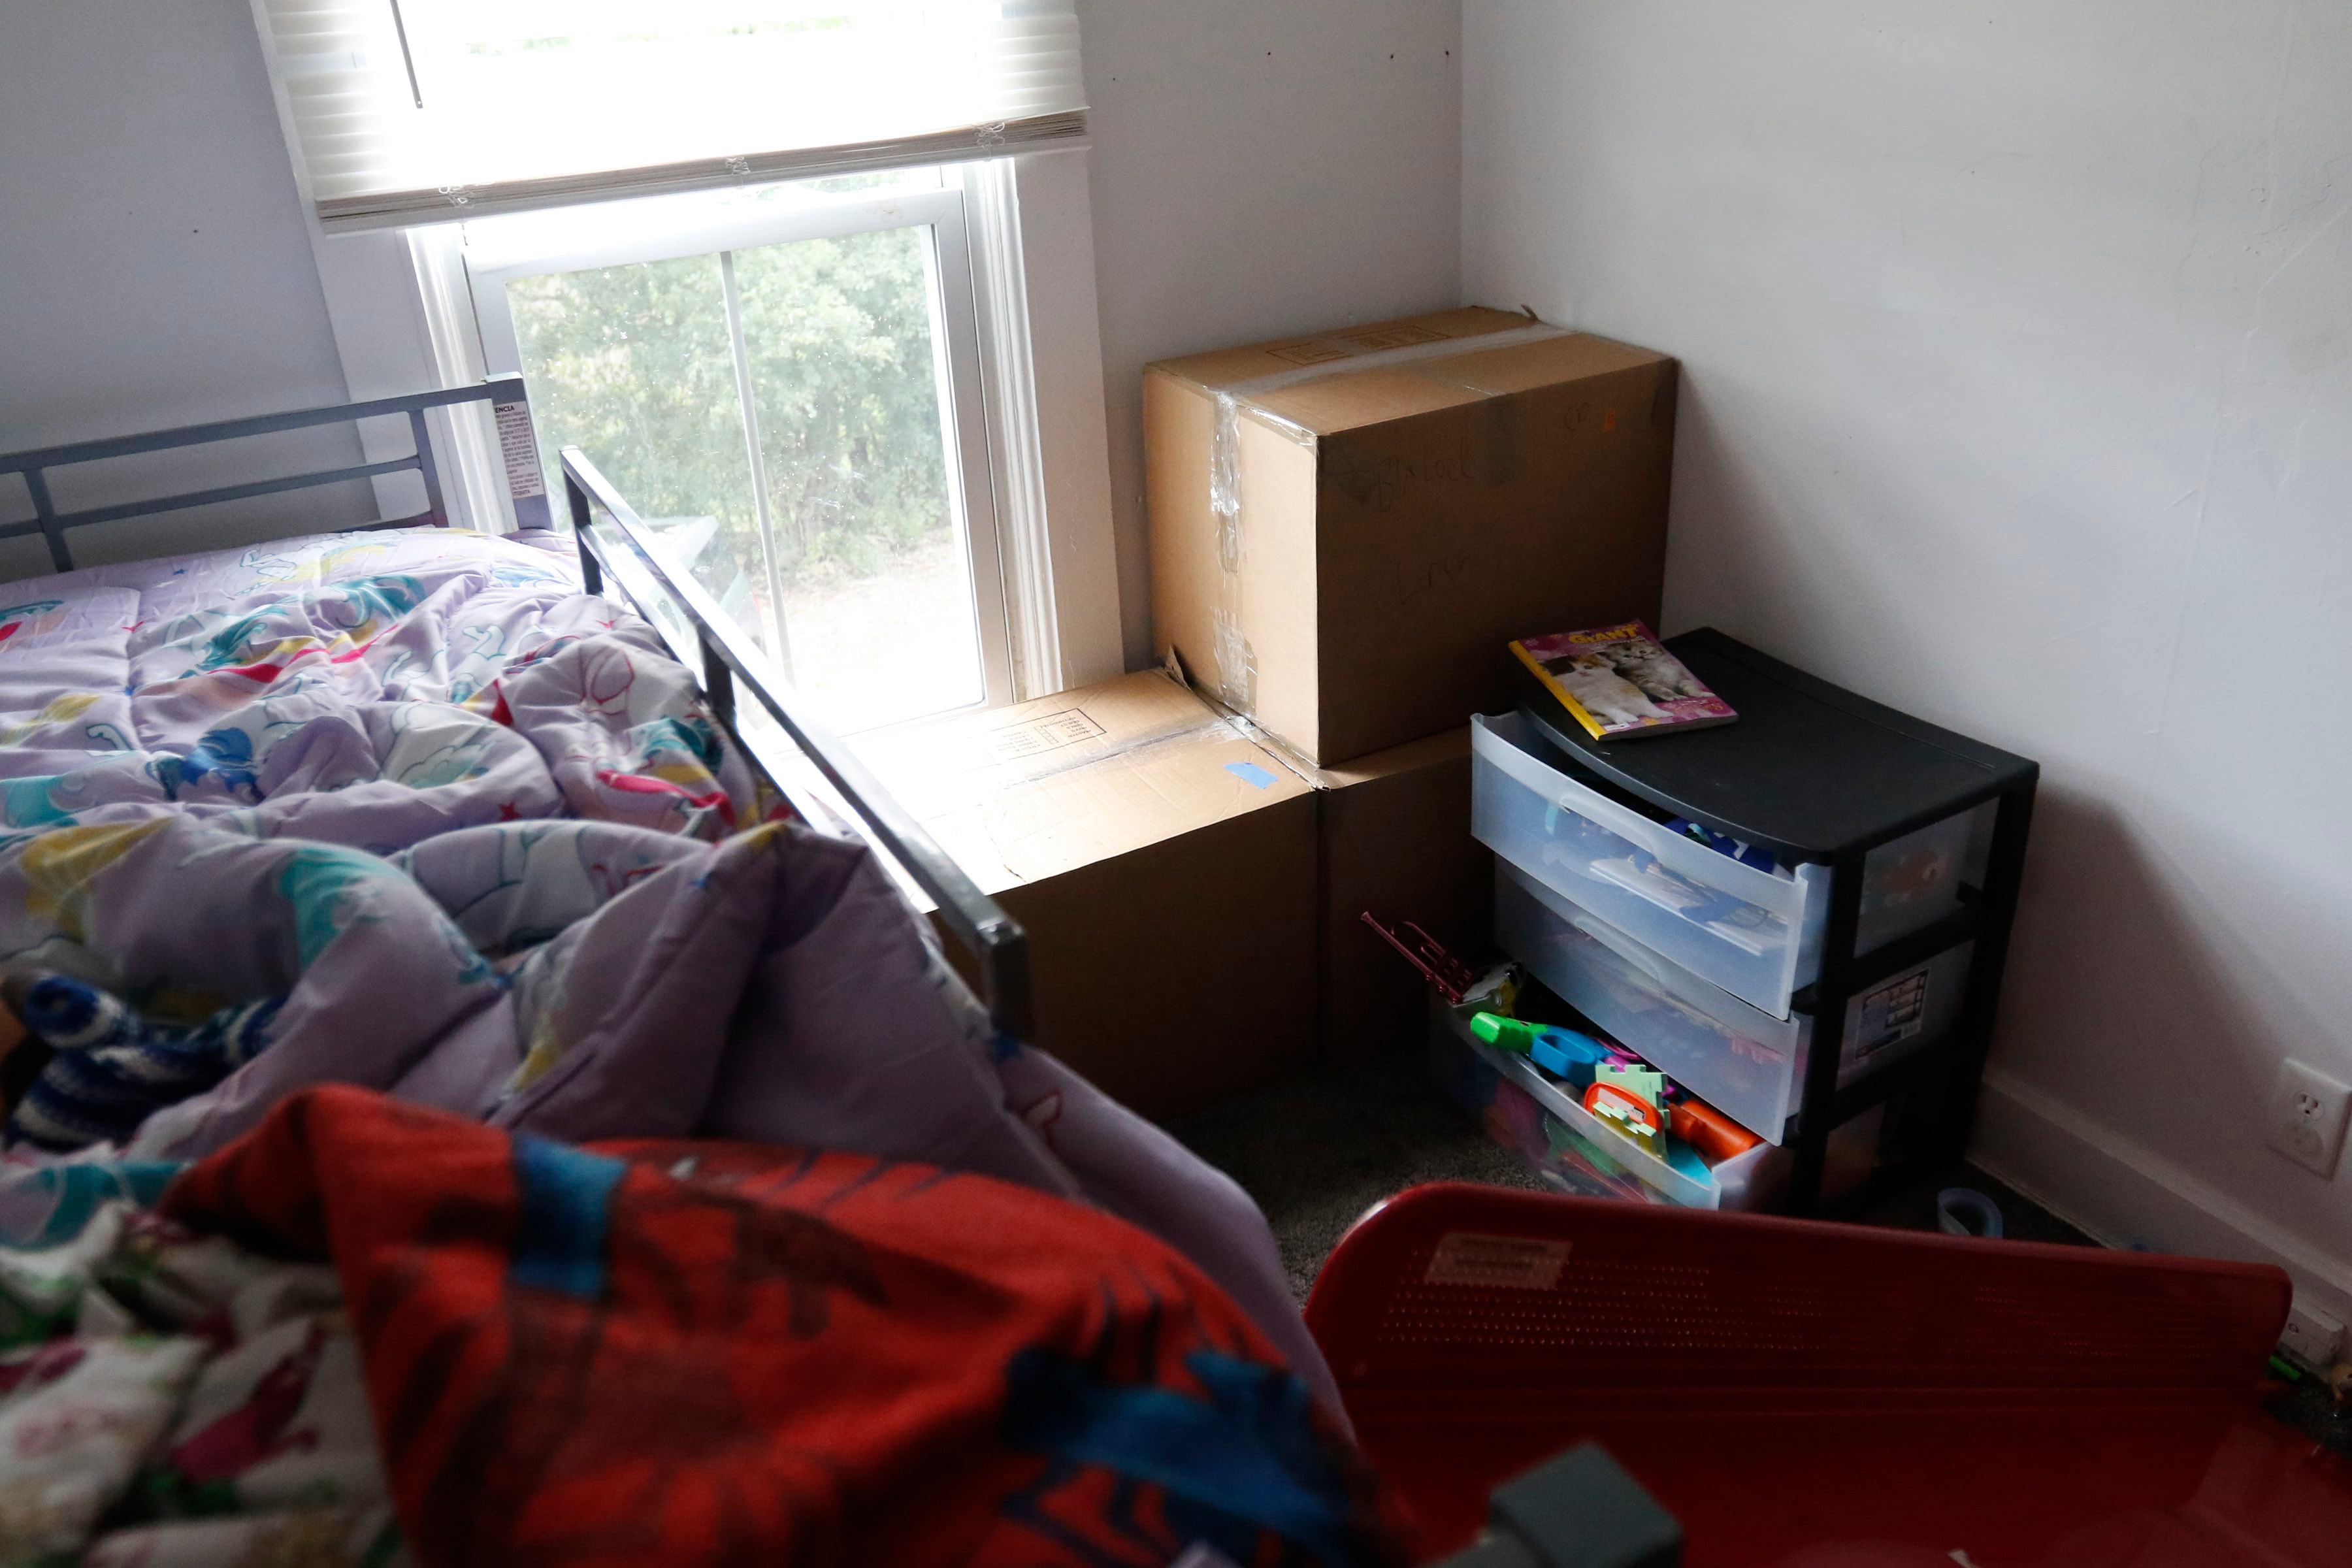 Boxes to toys from his daughters room that Ty Carter has pre-packed in his apartment in Lake Villa on Wednesday, August 3, 2022. Carter is looking for an affordable apartment to rent in McHenry County for his two children, and himself.